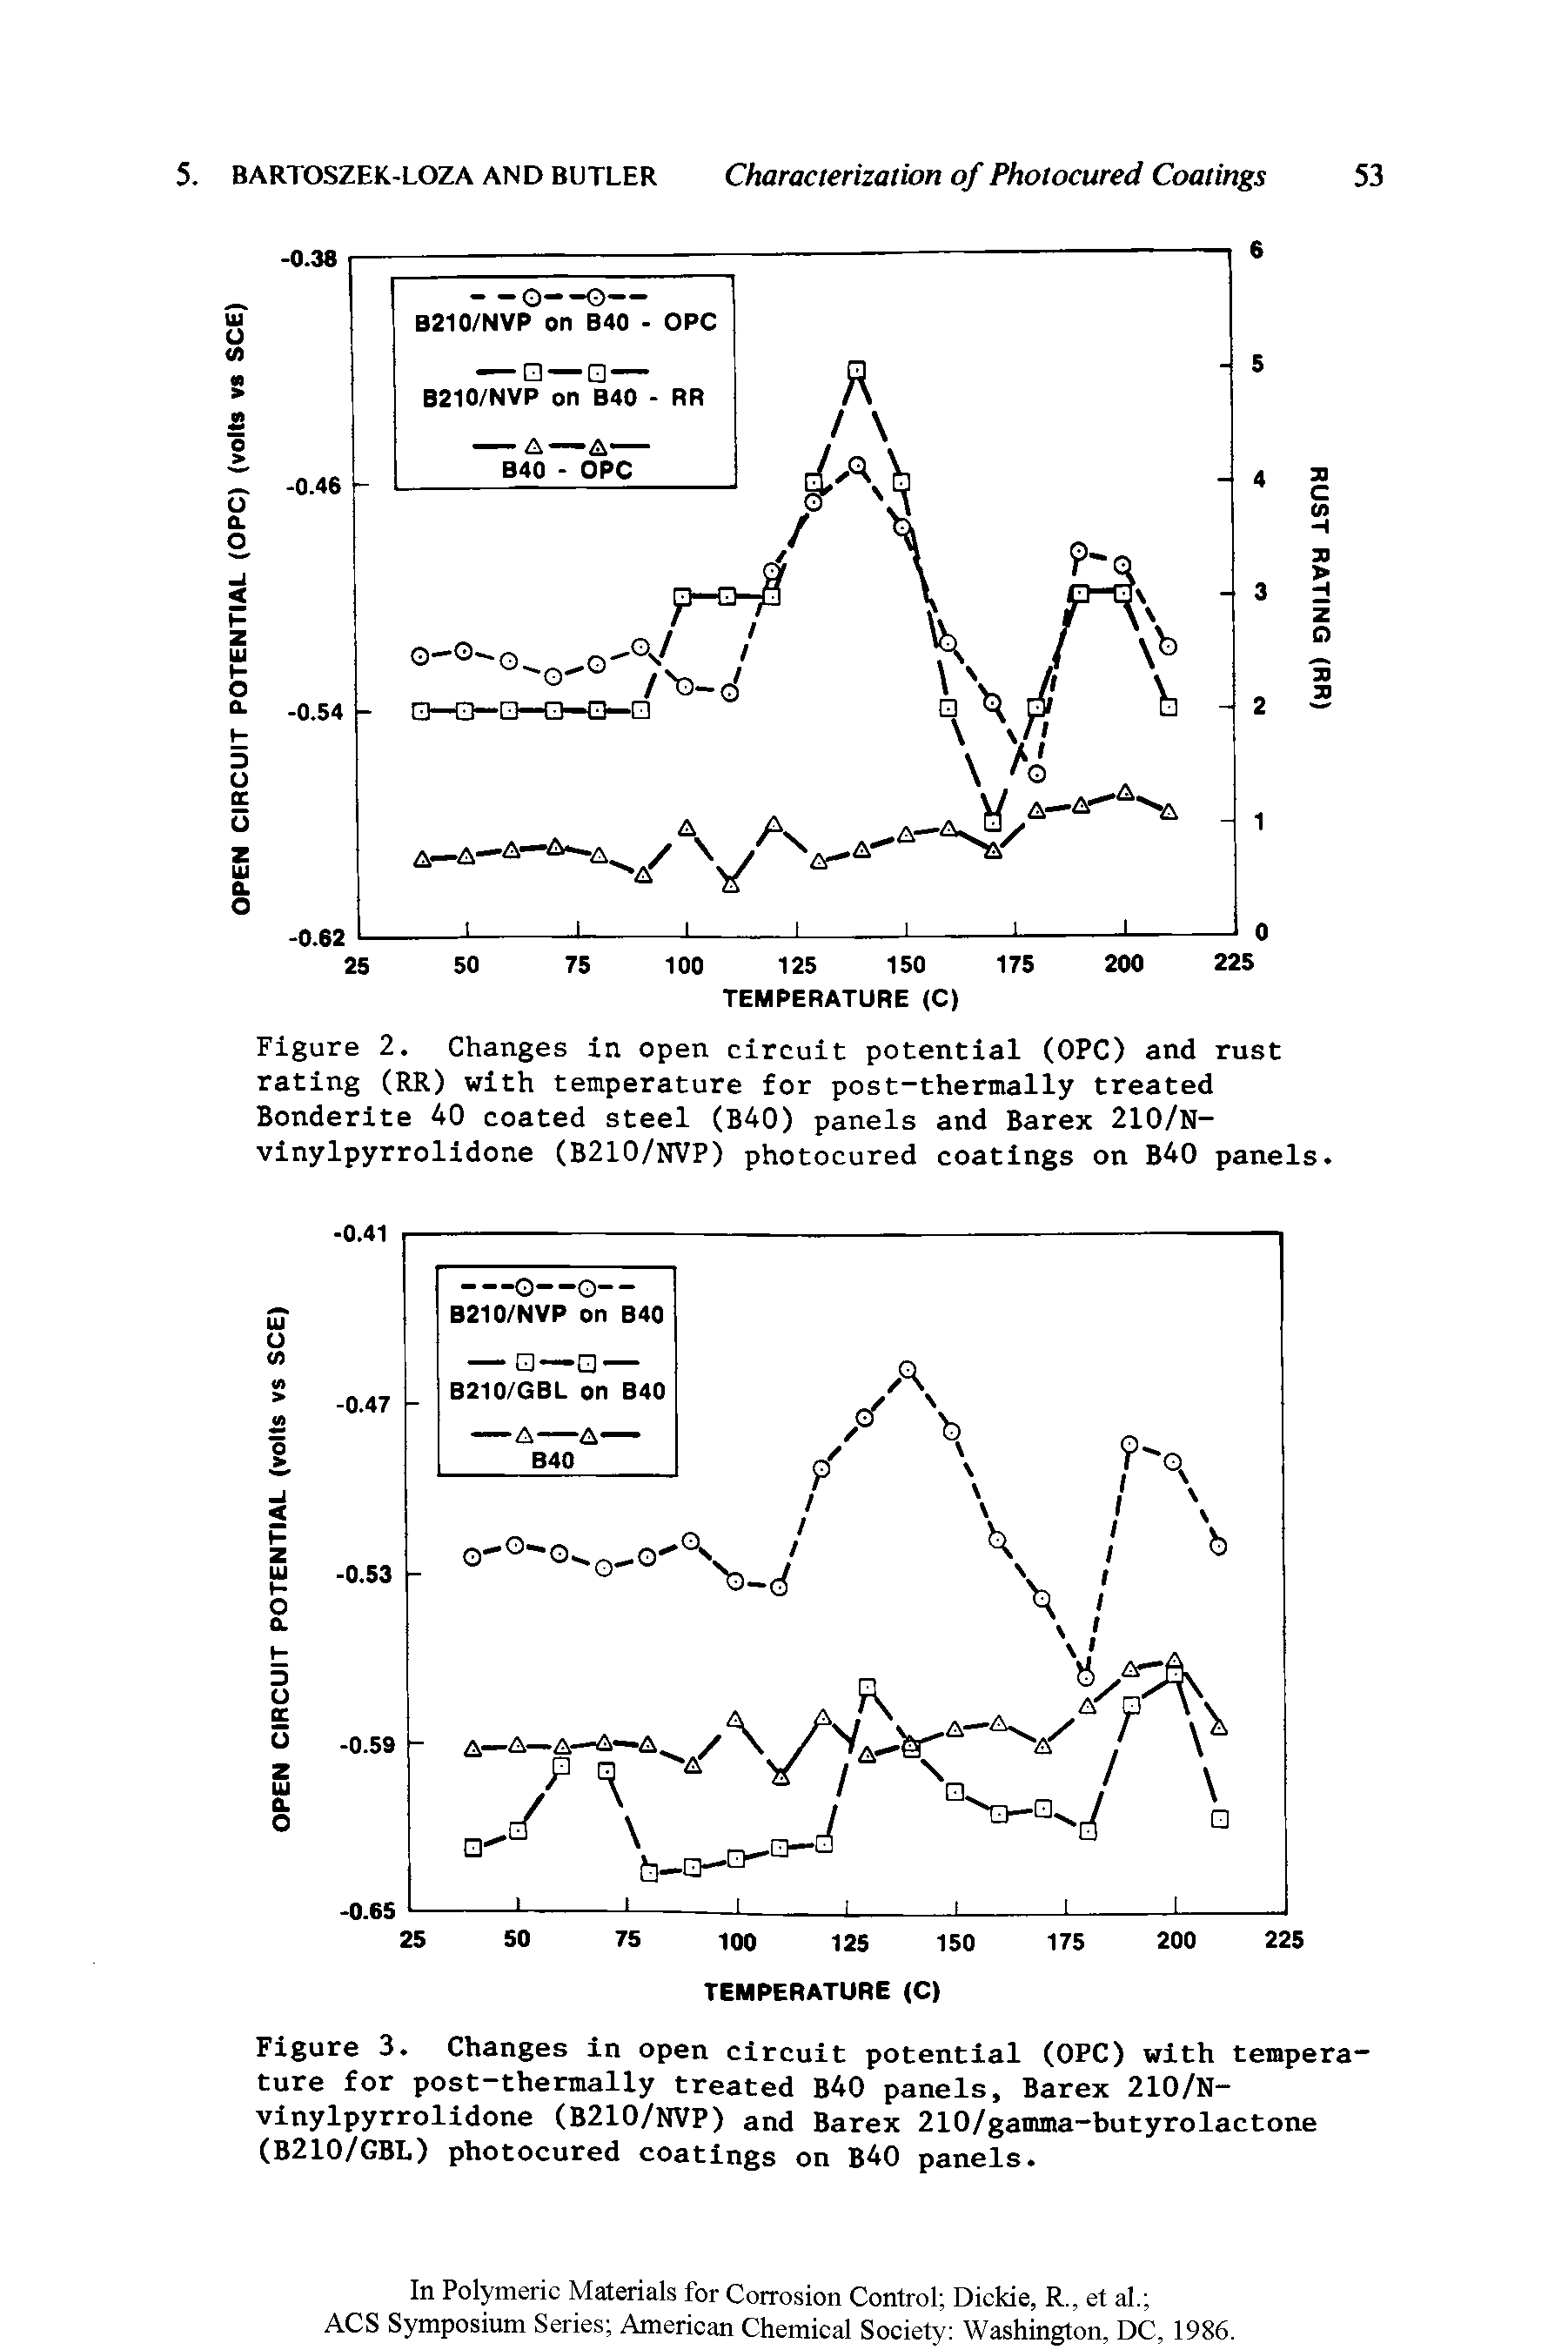 Figure 3. Changes in open circuit potential (OPC) with temperature for post-thermally treated BAO panels, Barex 210/N-vinylpyrrolidone (B210/NVP) and Barex 210/gamma-butyrolactone (B210/GBL) photocured coatings on BAO panels.